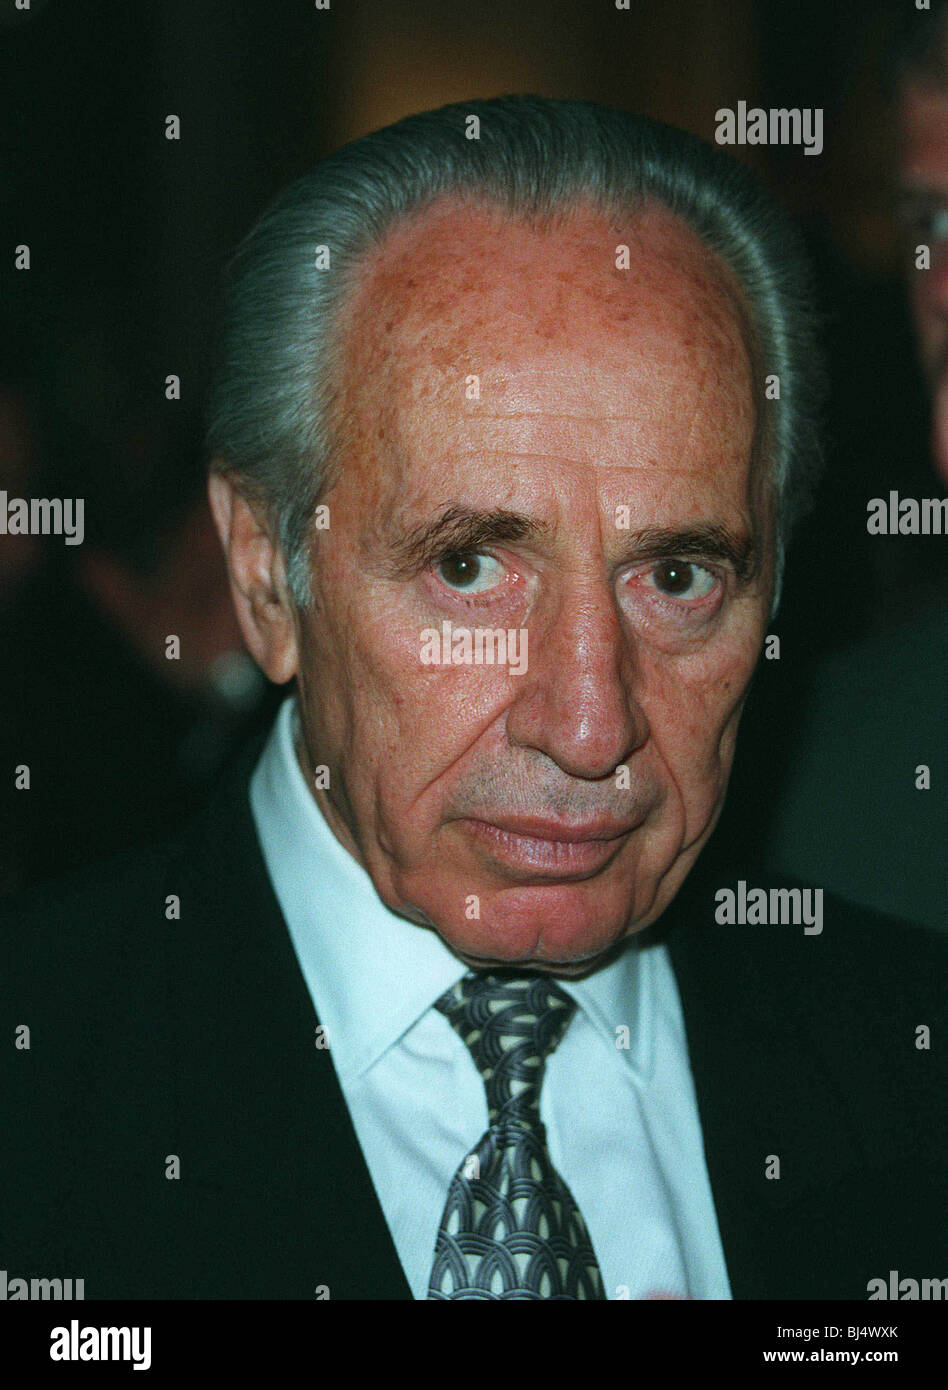 SHIMON PERES FOREIGN MINISTER OF ISRAEL 23 March 1995 Stock Photo